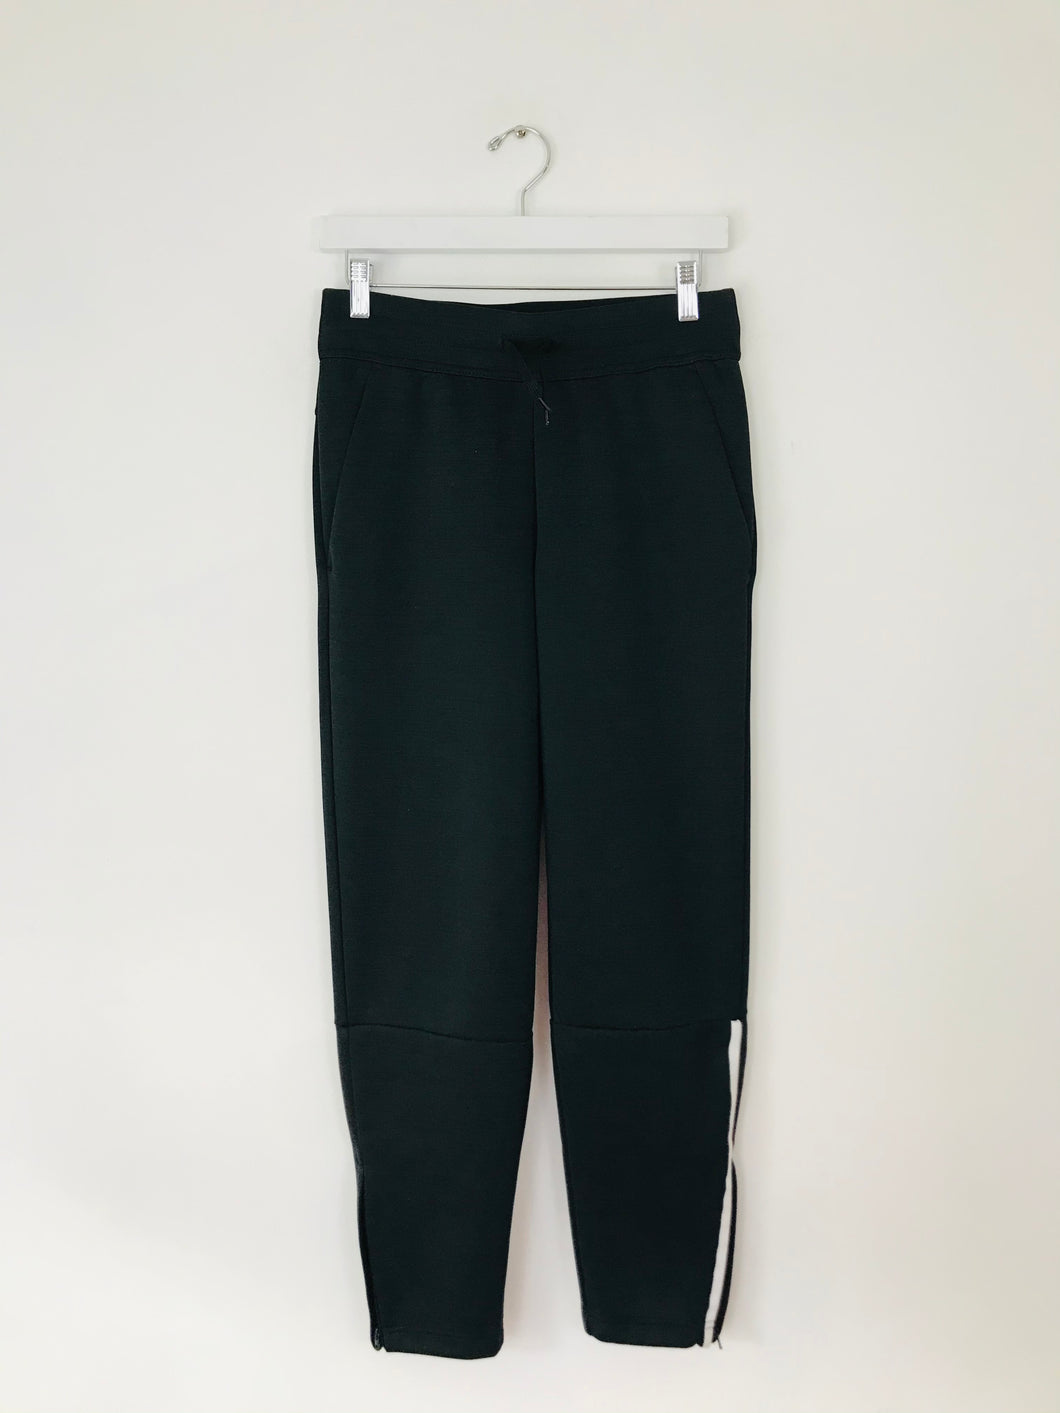 Adidas Youth Girl’s Joggers Tracksuit Bottoms | 14-15Y | Black